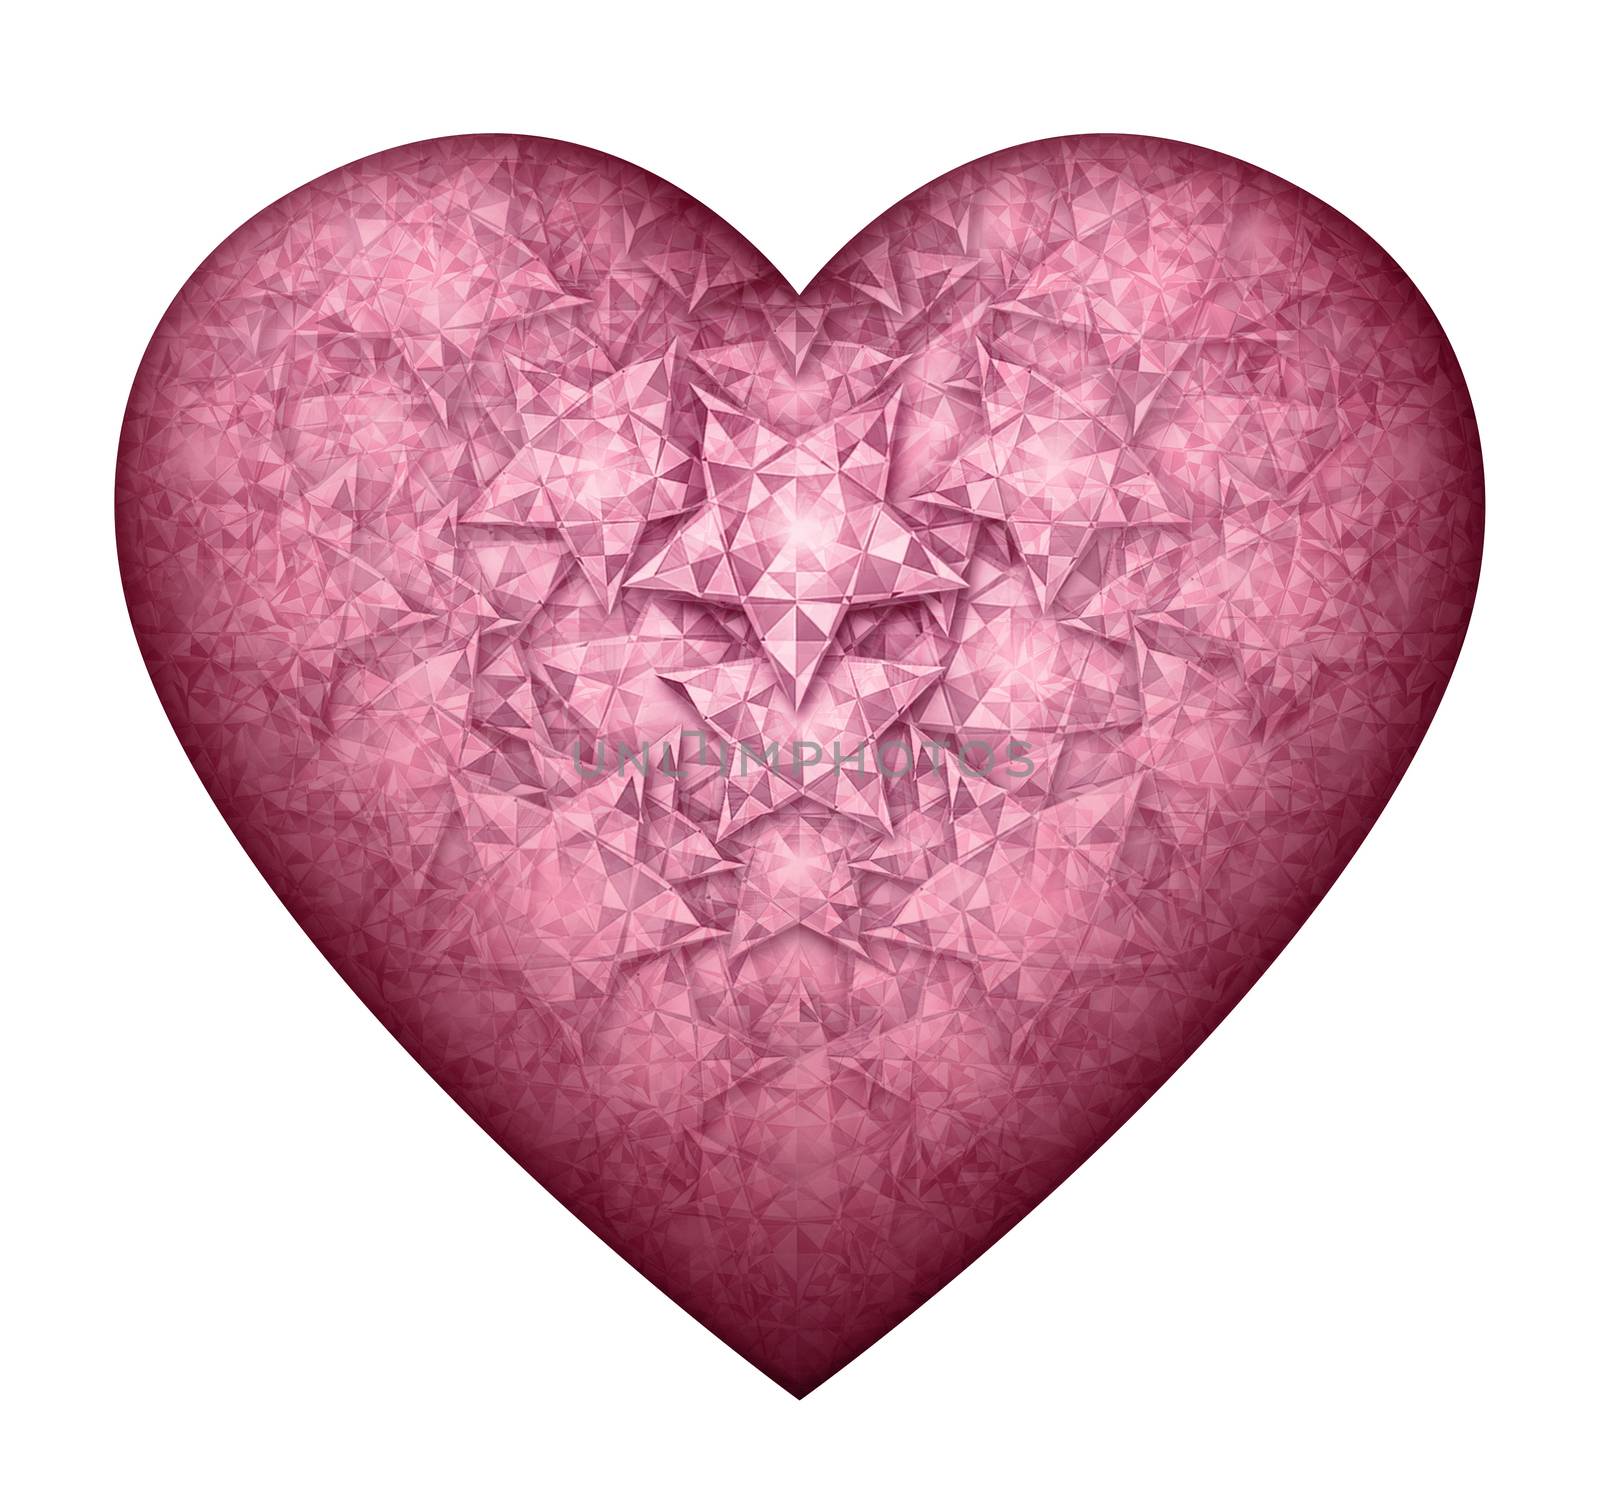 Digital illustration of a pink heart with diamonds showing through.